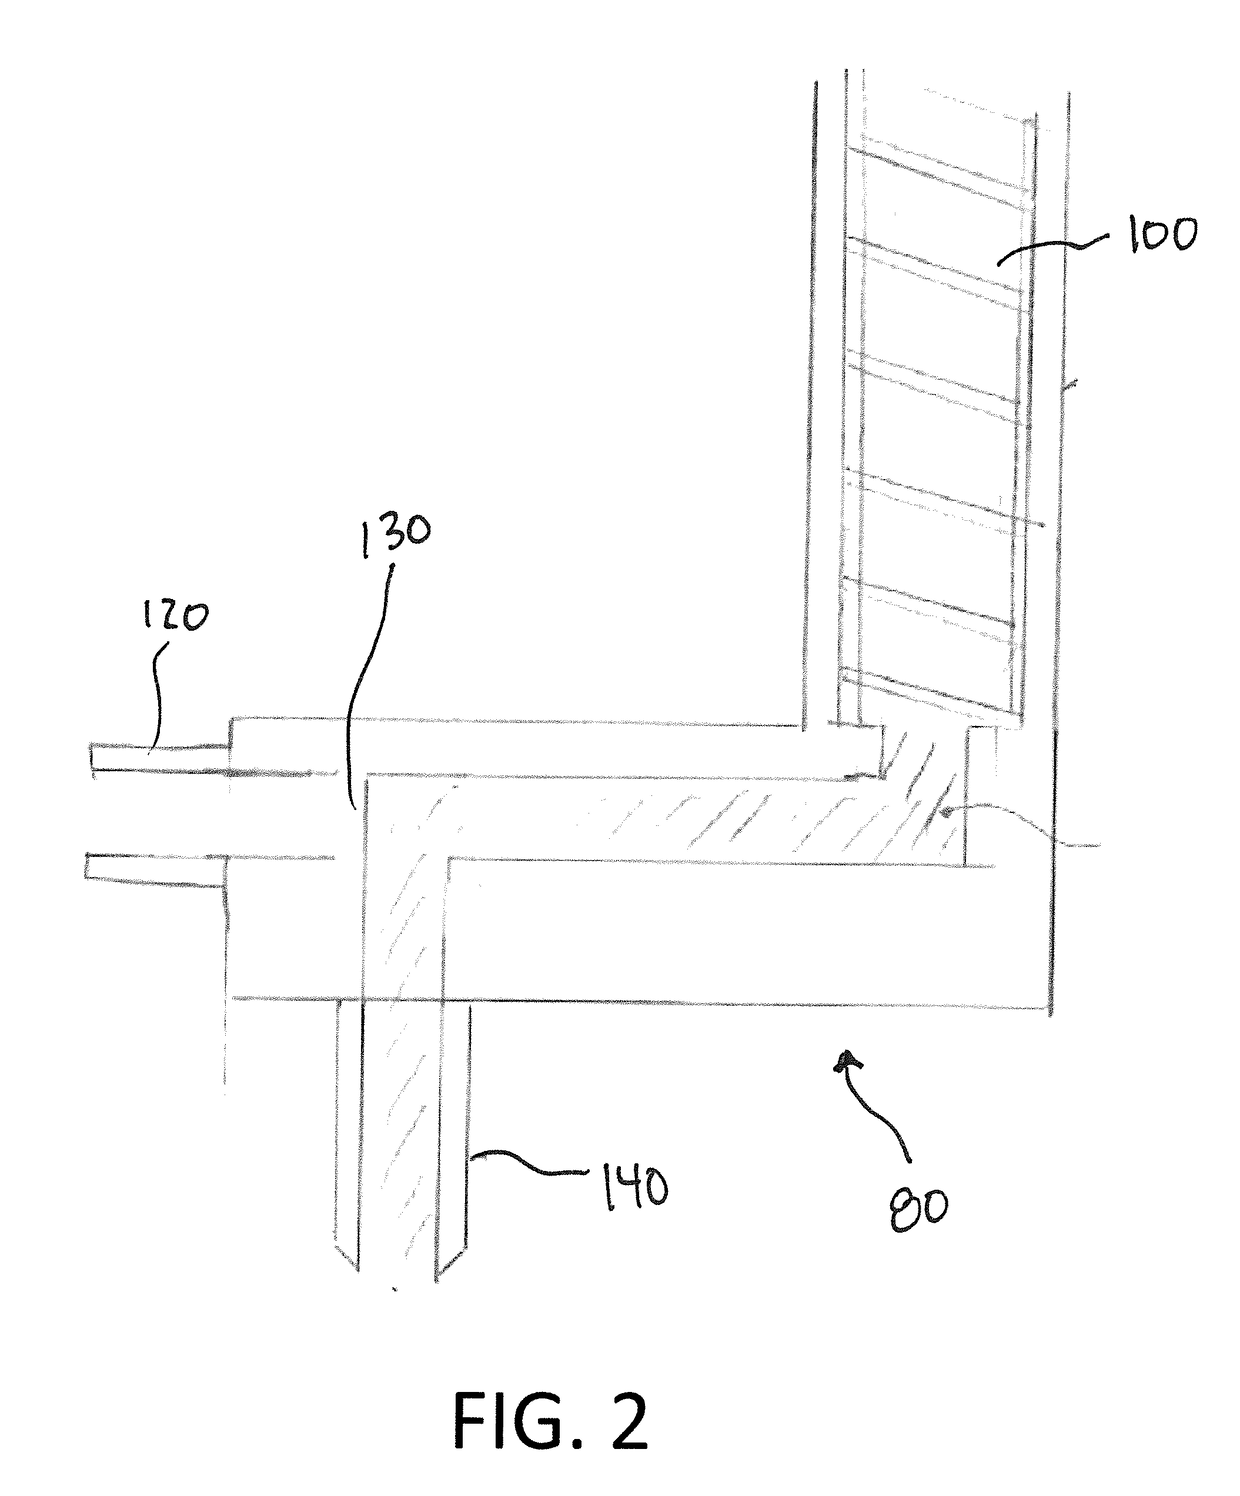 Polymer exhaust for eliminating extruder transients